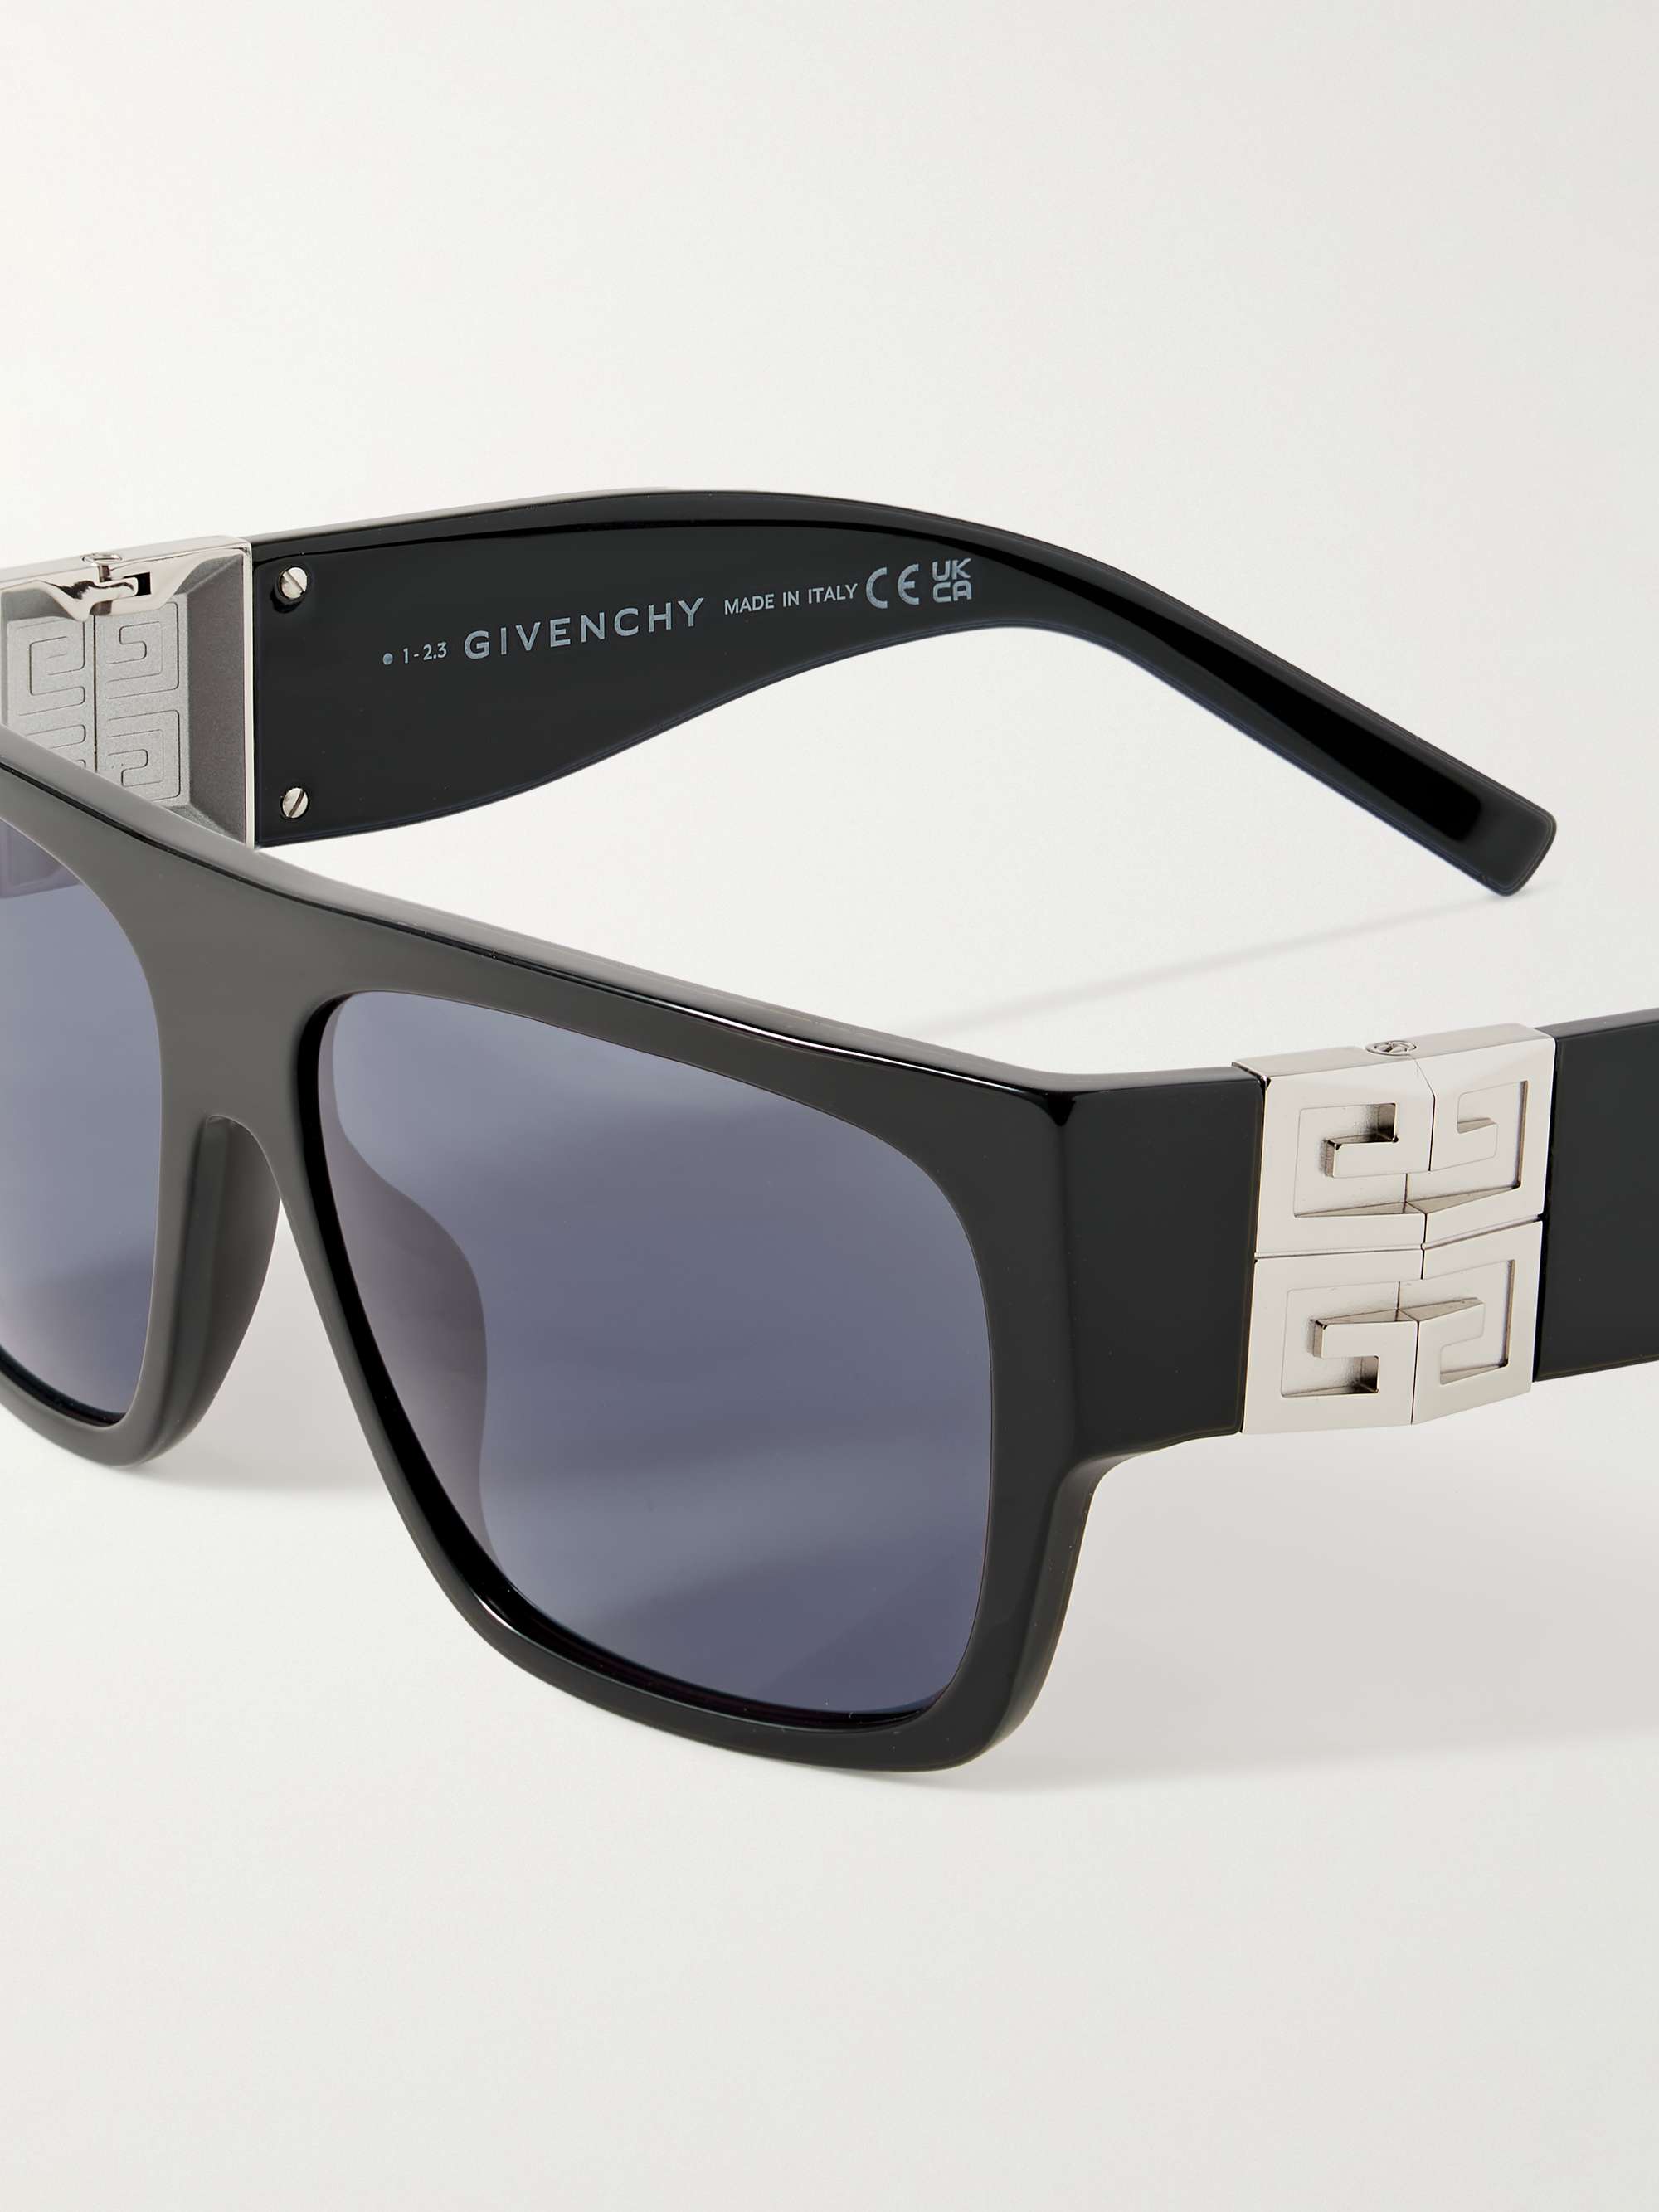 Square Sunglass for Men Women Mosaic Acetate Frame Silver Accents